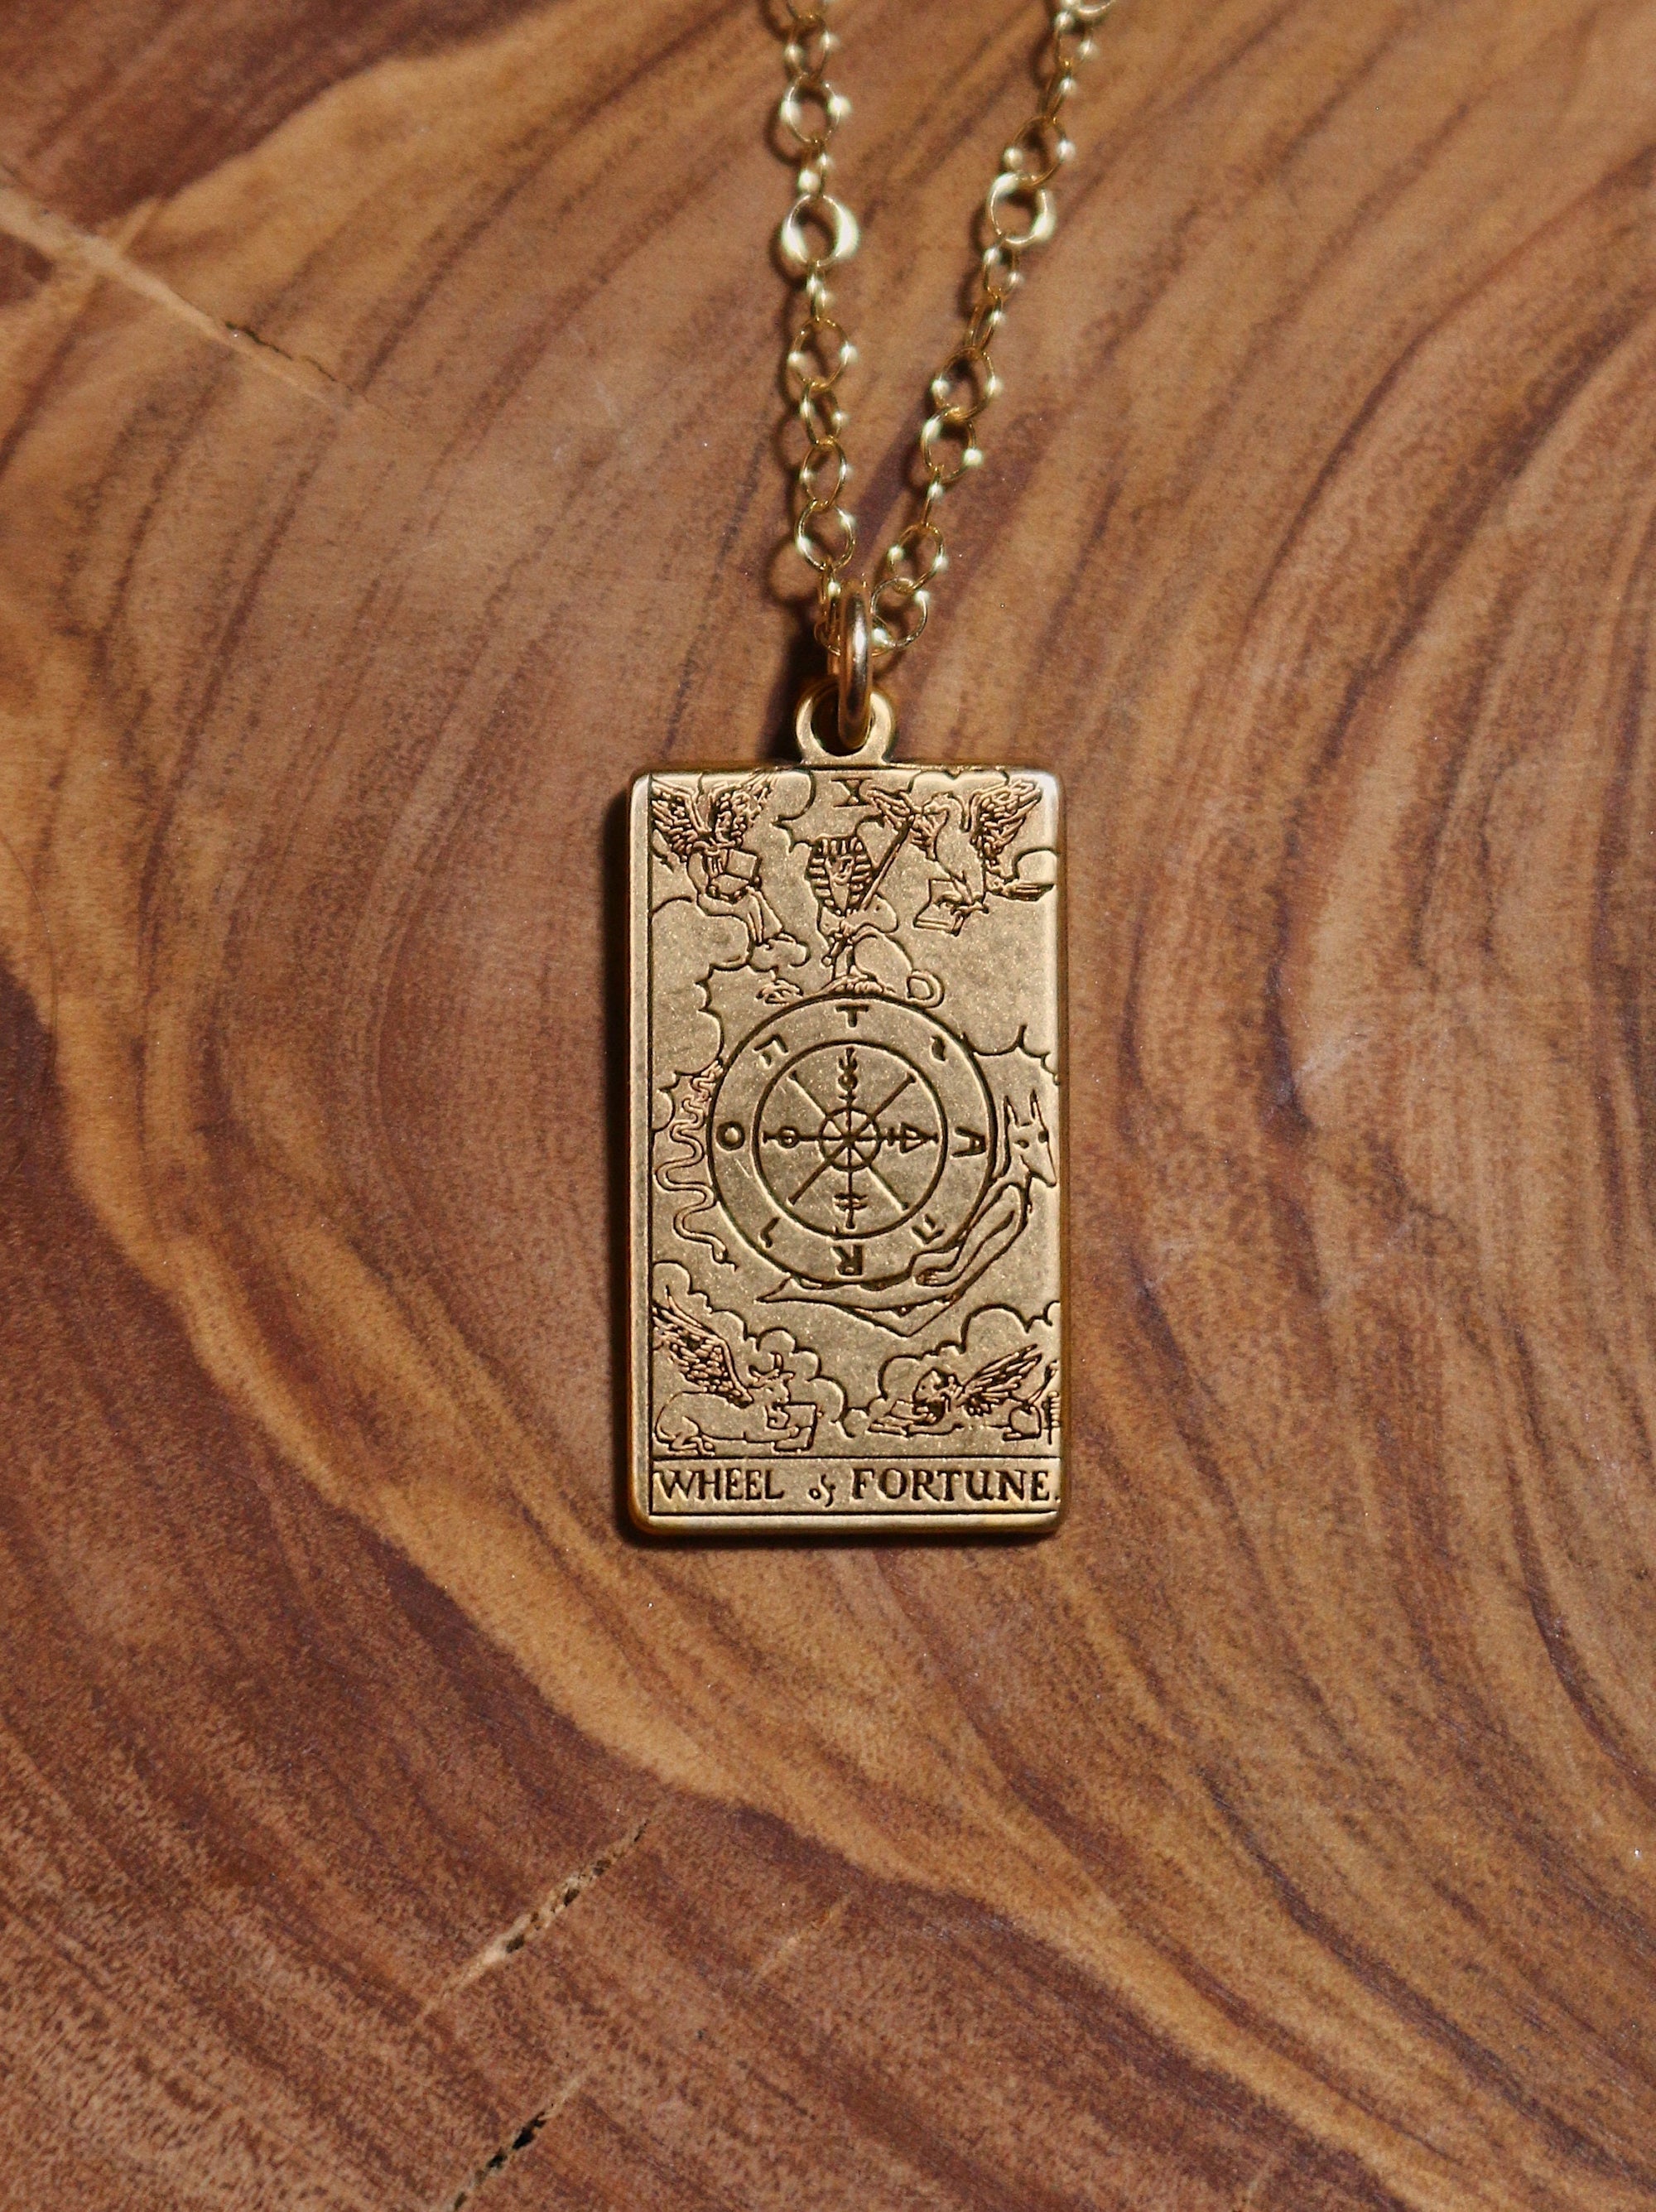 Wheel of Fortune Tarot Card Necklace - Gold Filled